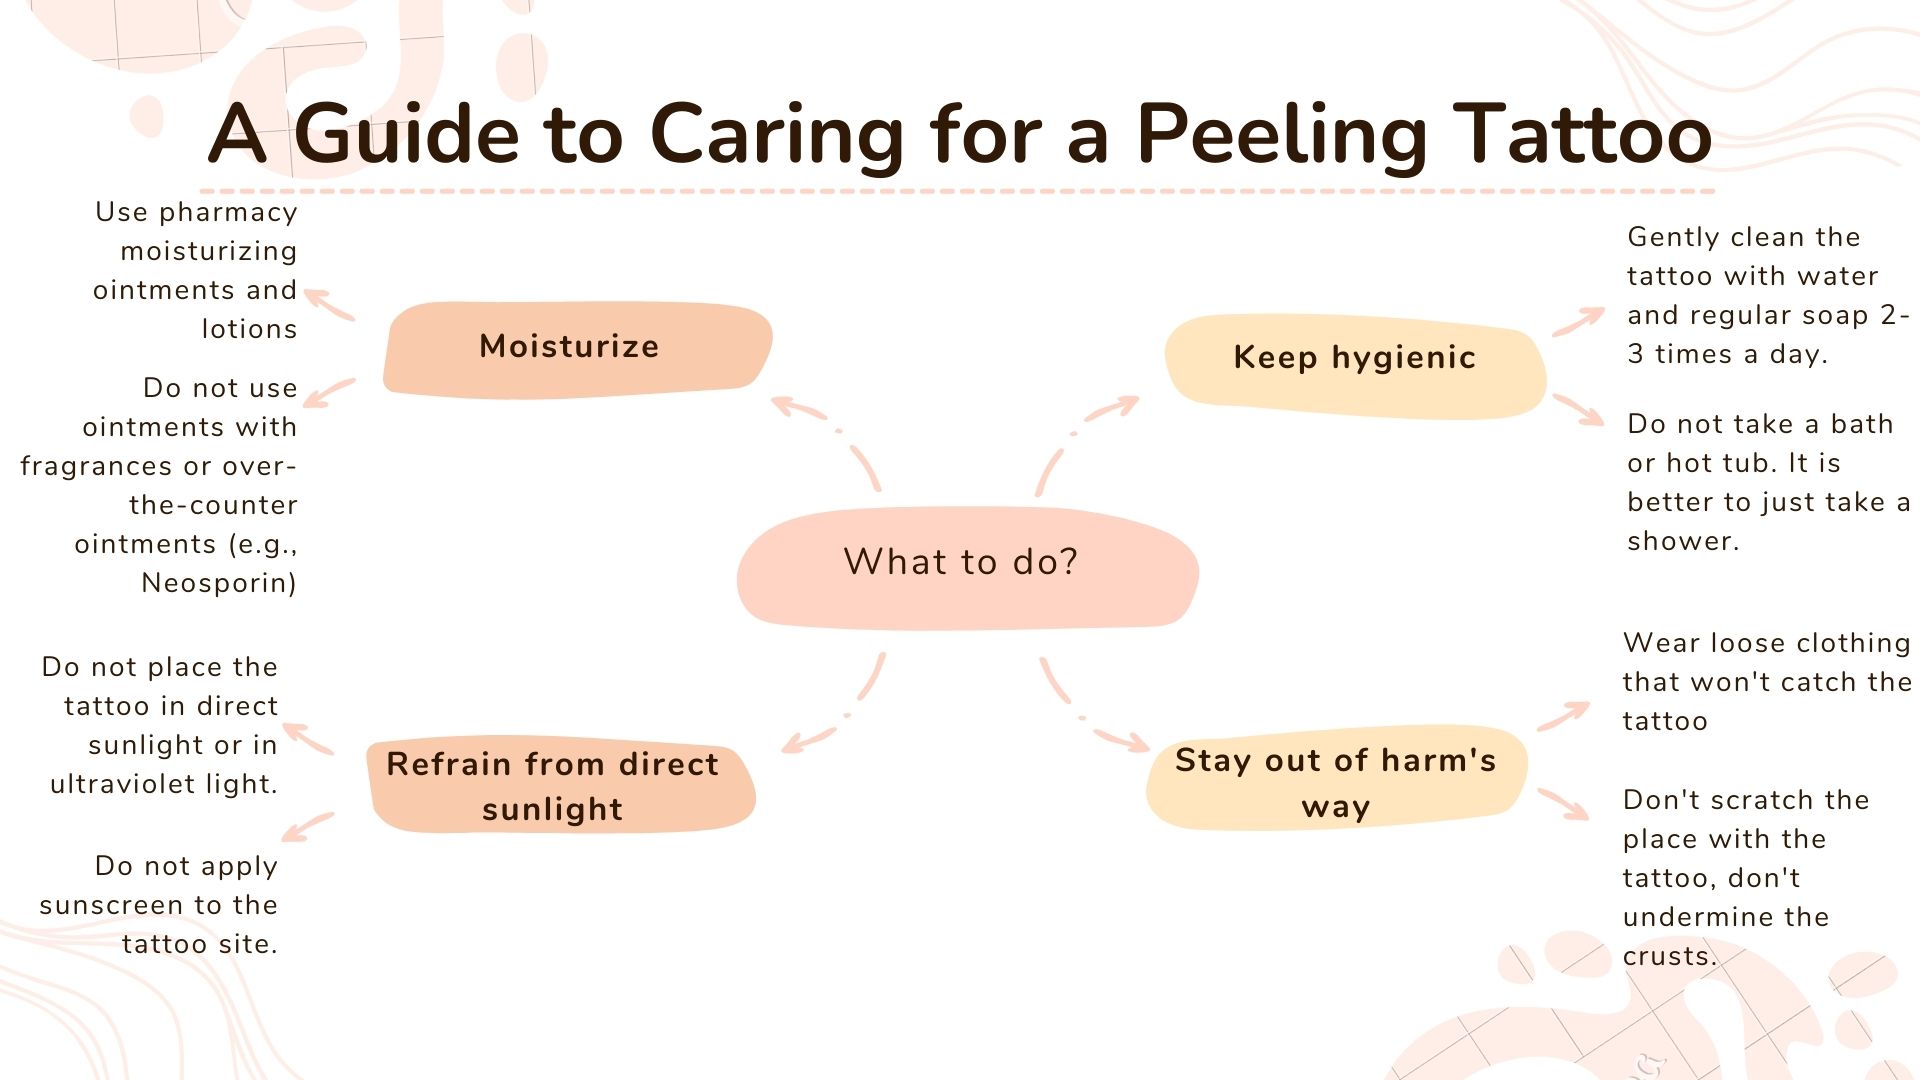 A guide for a peeling tattoo caring